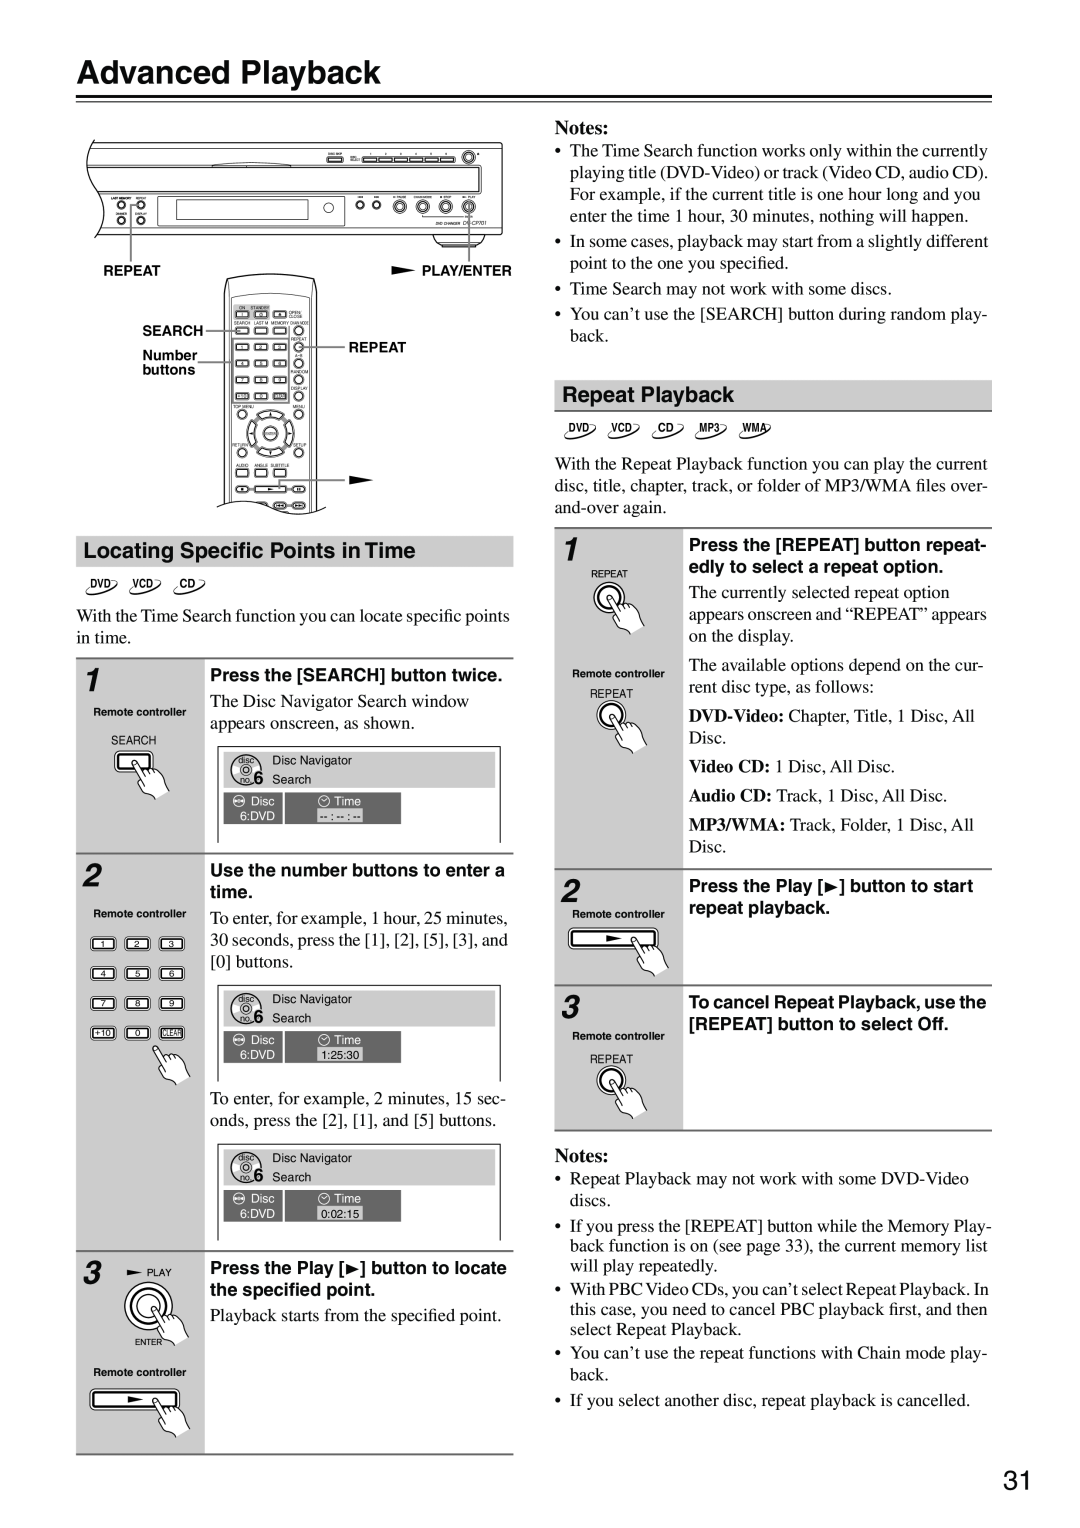 Onkyo DV-CP701 instruction manual Advanced Playback, Locating Speciﬁc Points in Time, Repeat Playback, Notes 